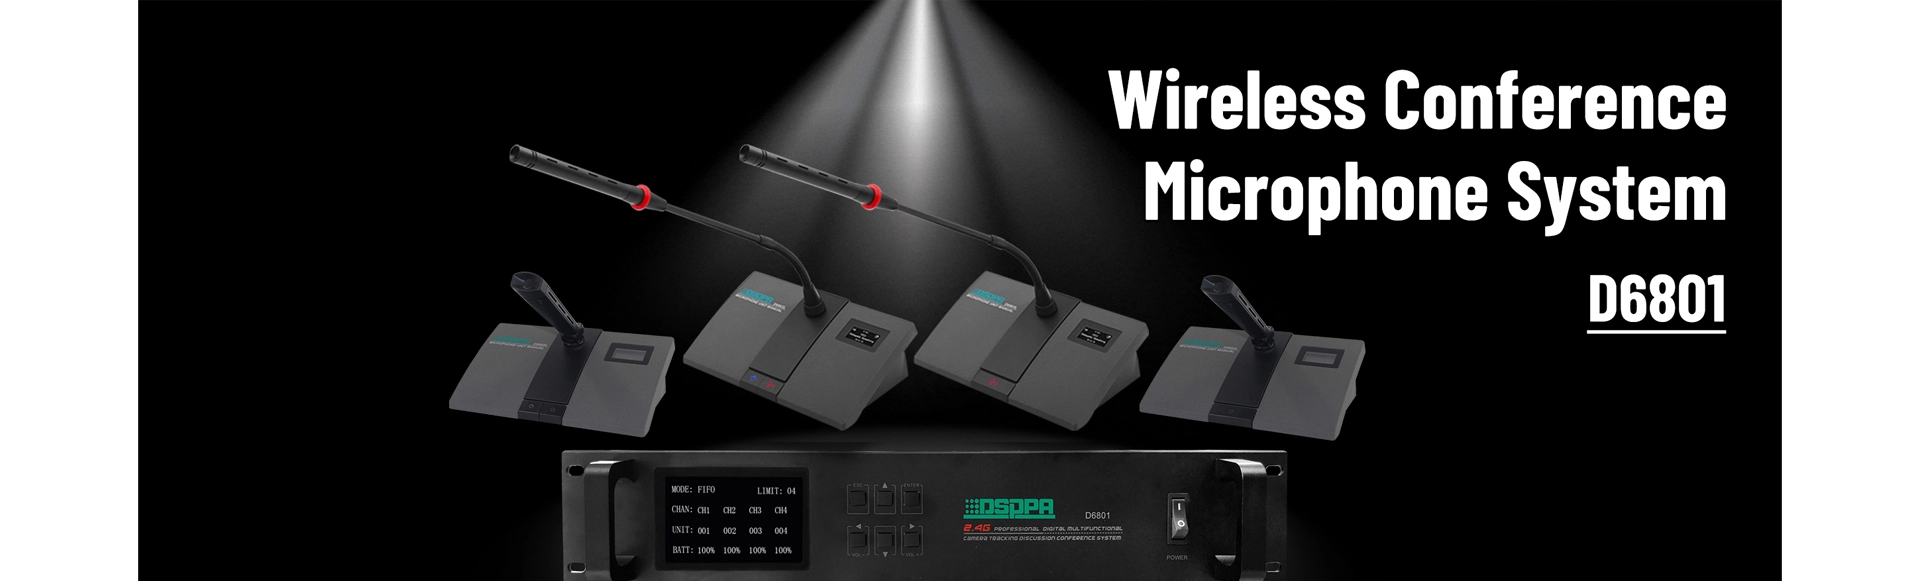 Wireless Chairman Microphone with Lithium Battery